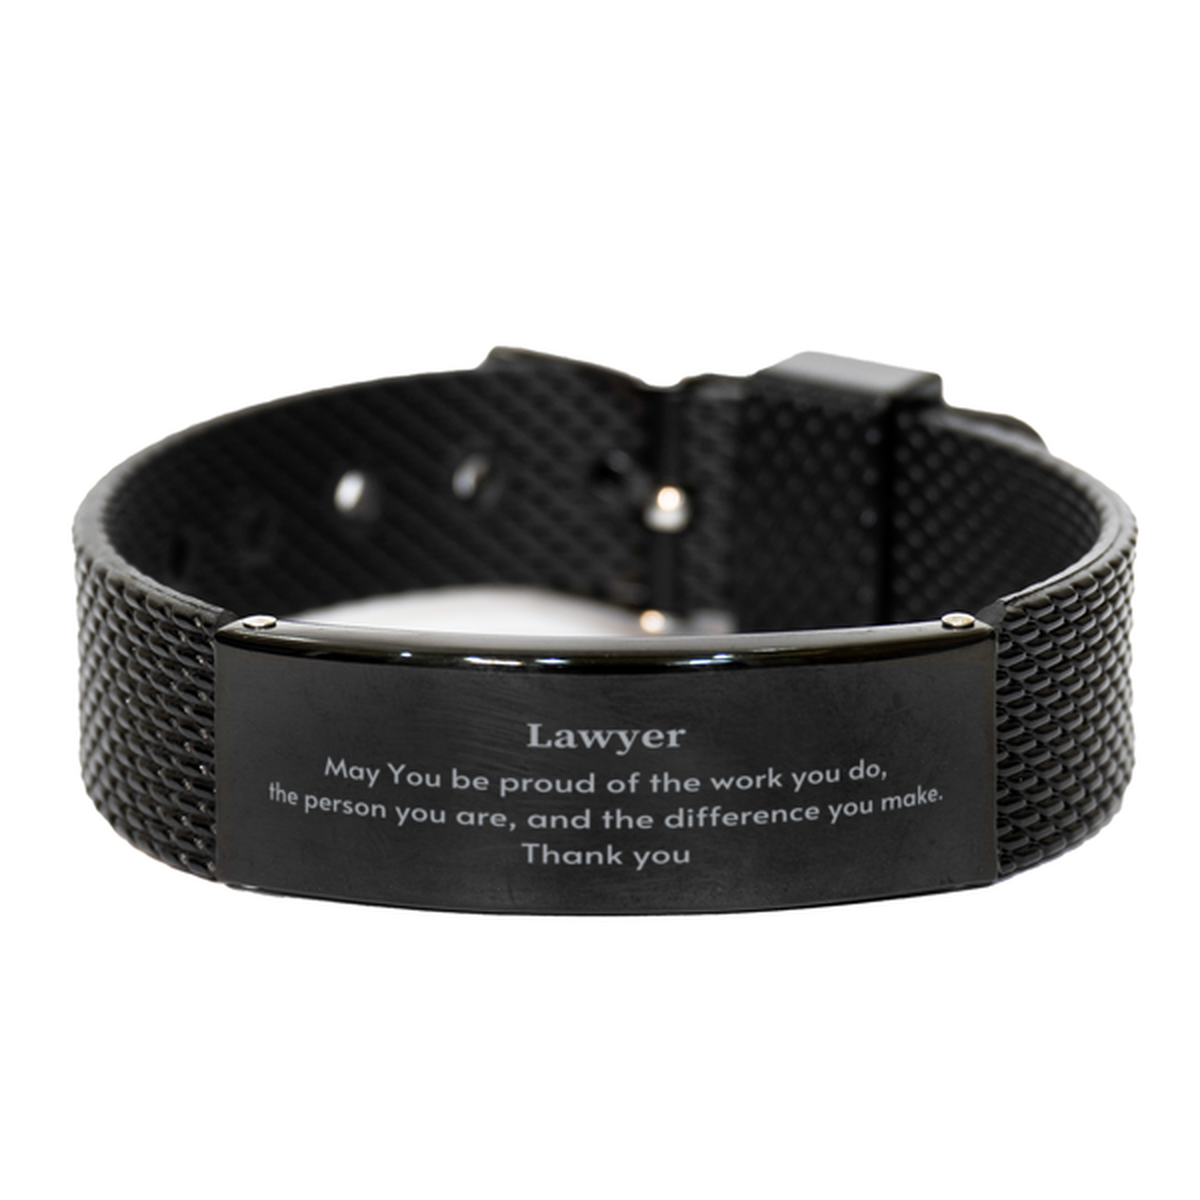 Heartwarming Black Shark Mesh Bracelet Retirement Coworkers Gifts for Lawyer, Lawyer May You be proud of the work you do, the person you are Gifts for Boss Men Women Friends